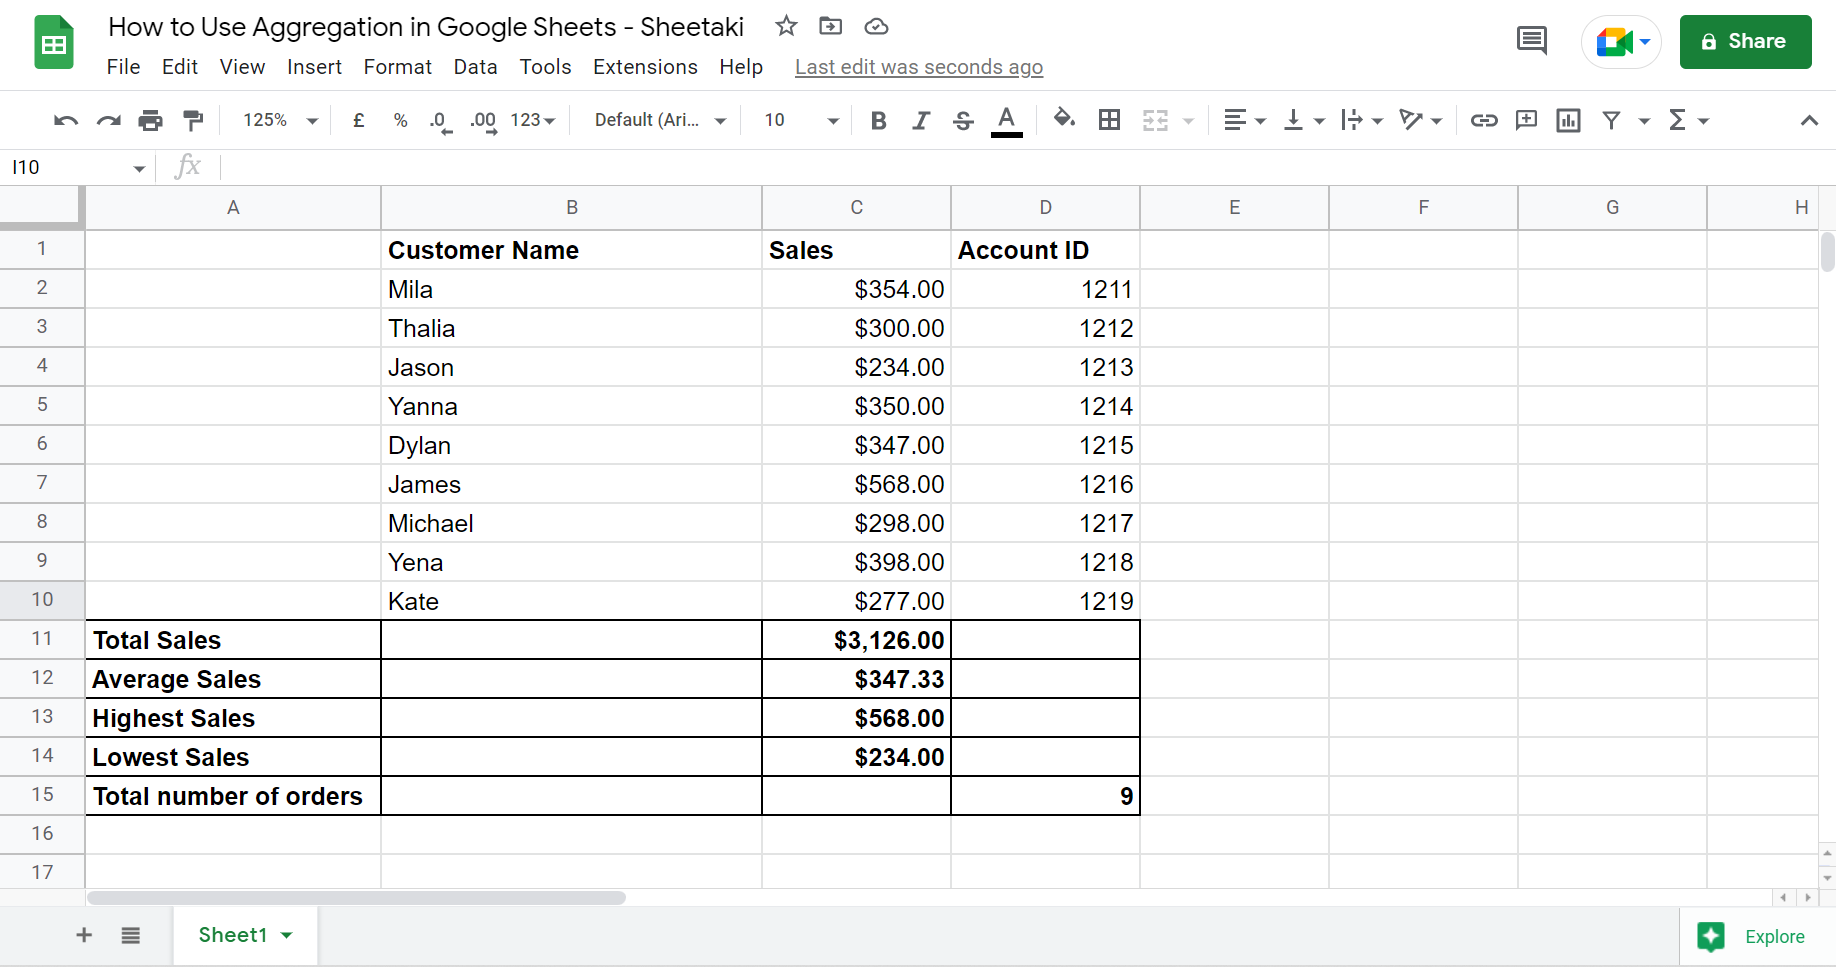 Aggregation in Google Sheets